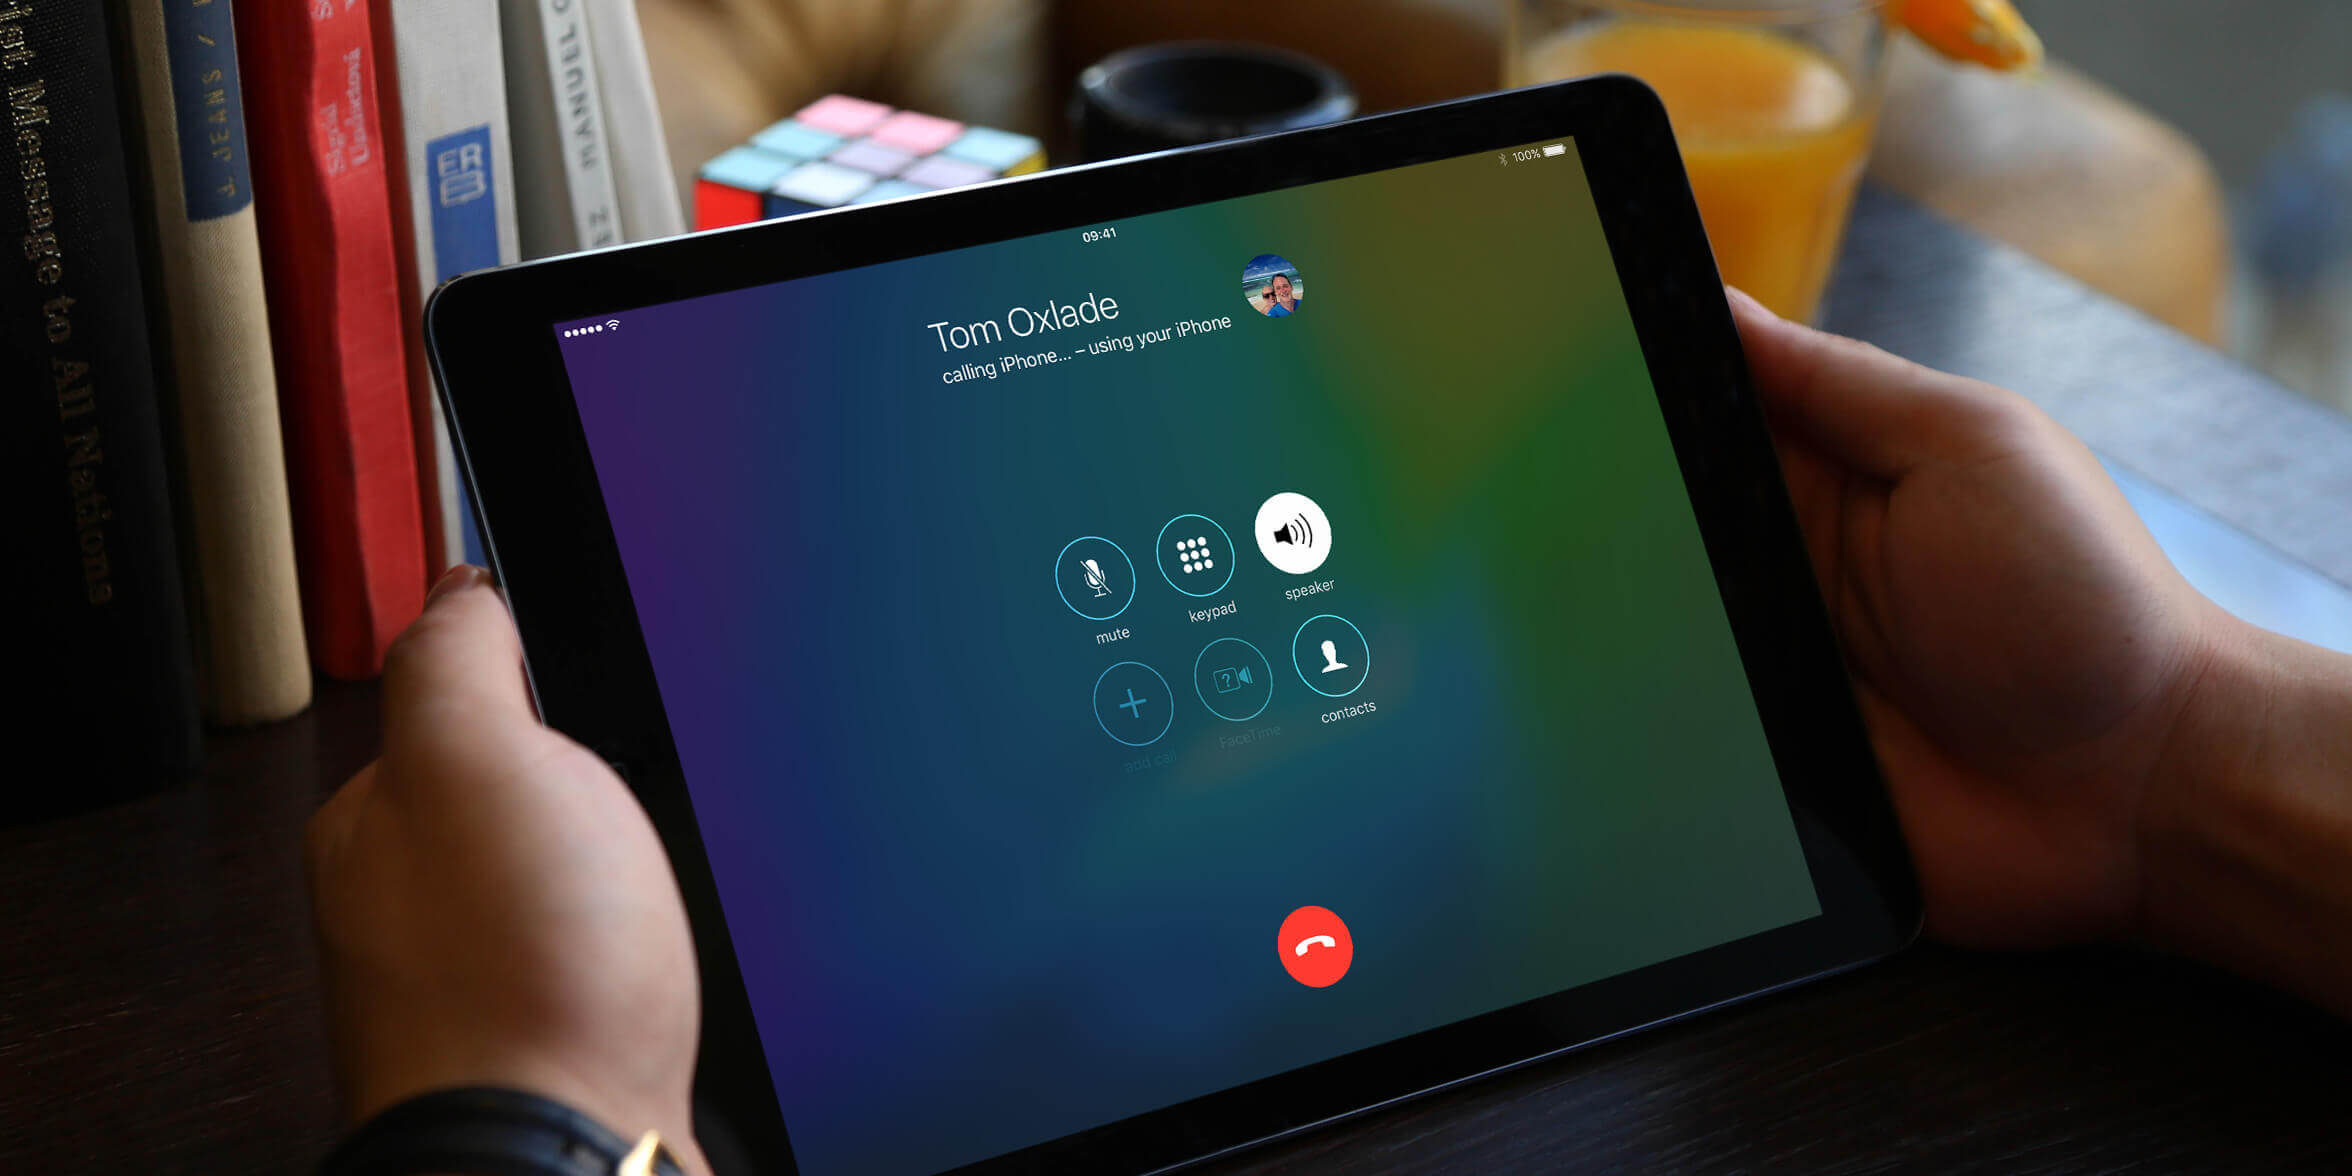 How To Make Phone Call From Tablet